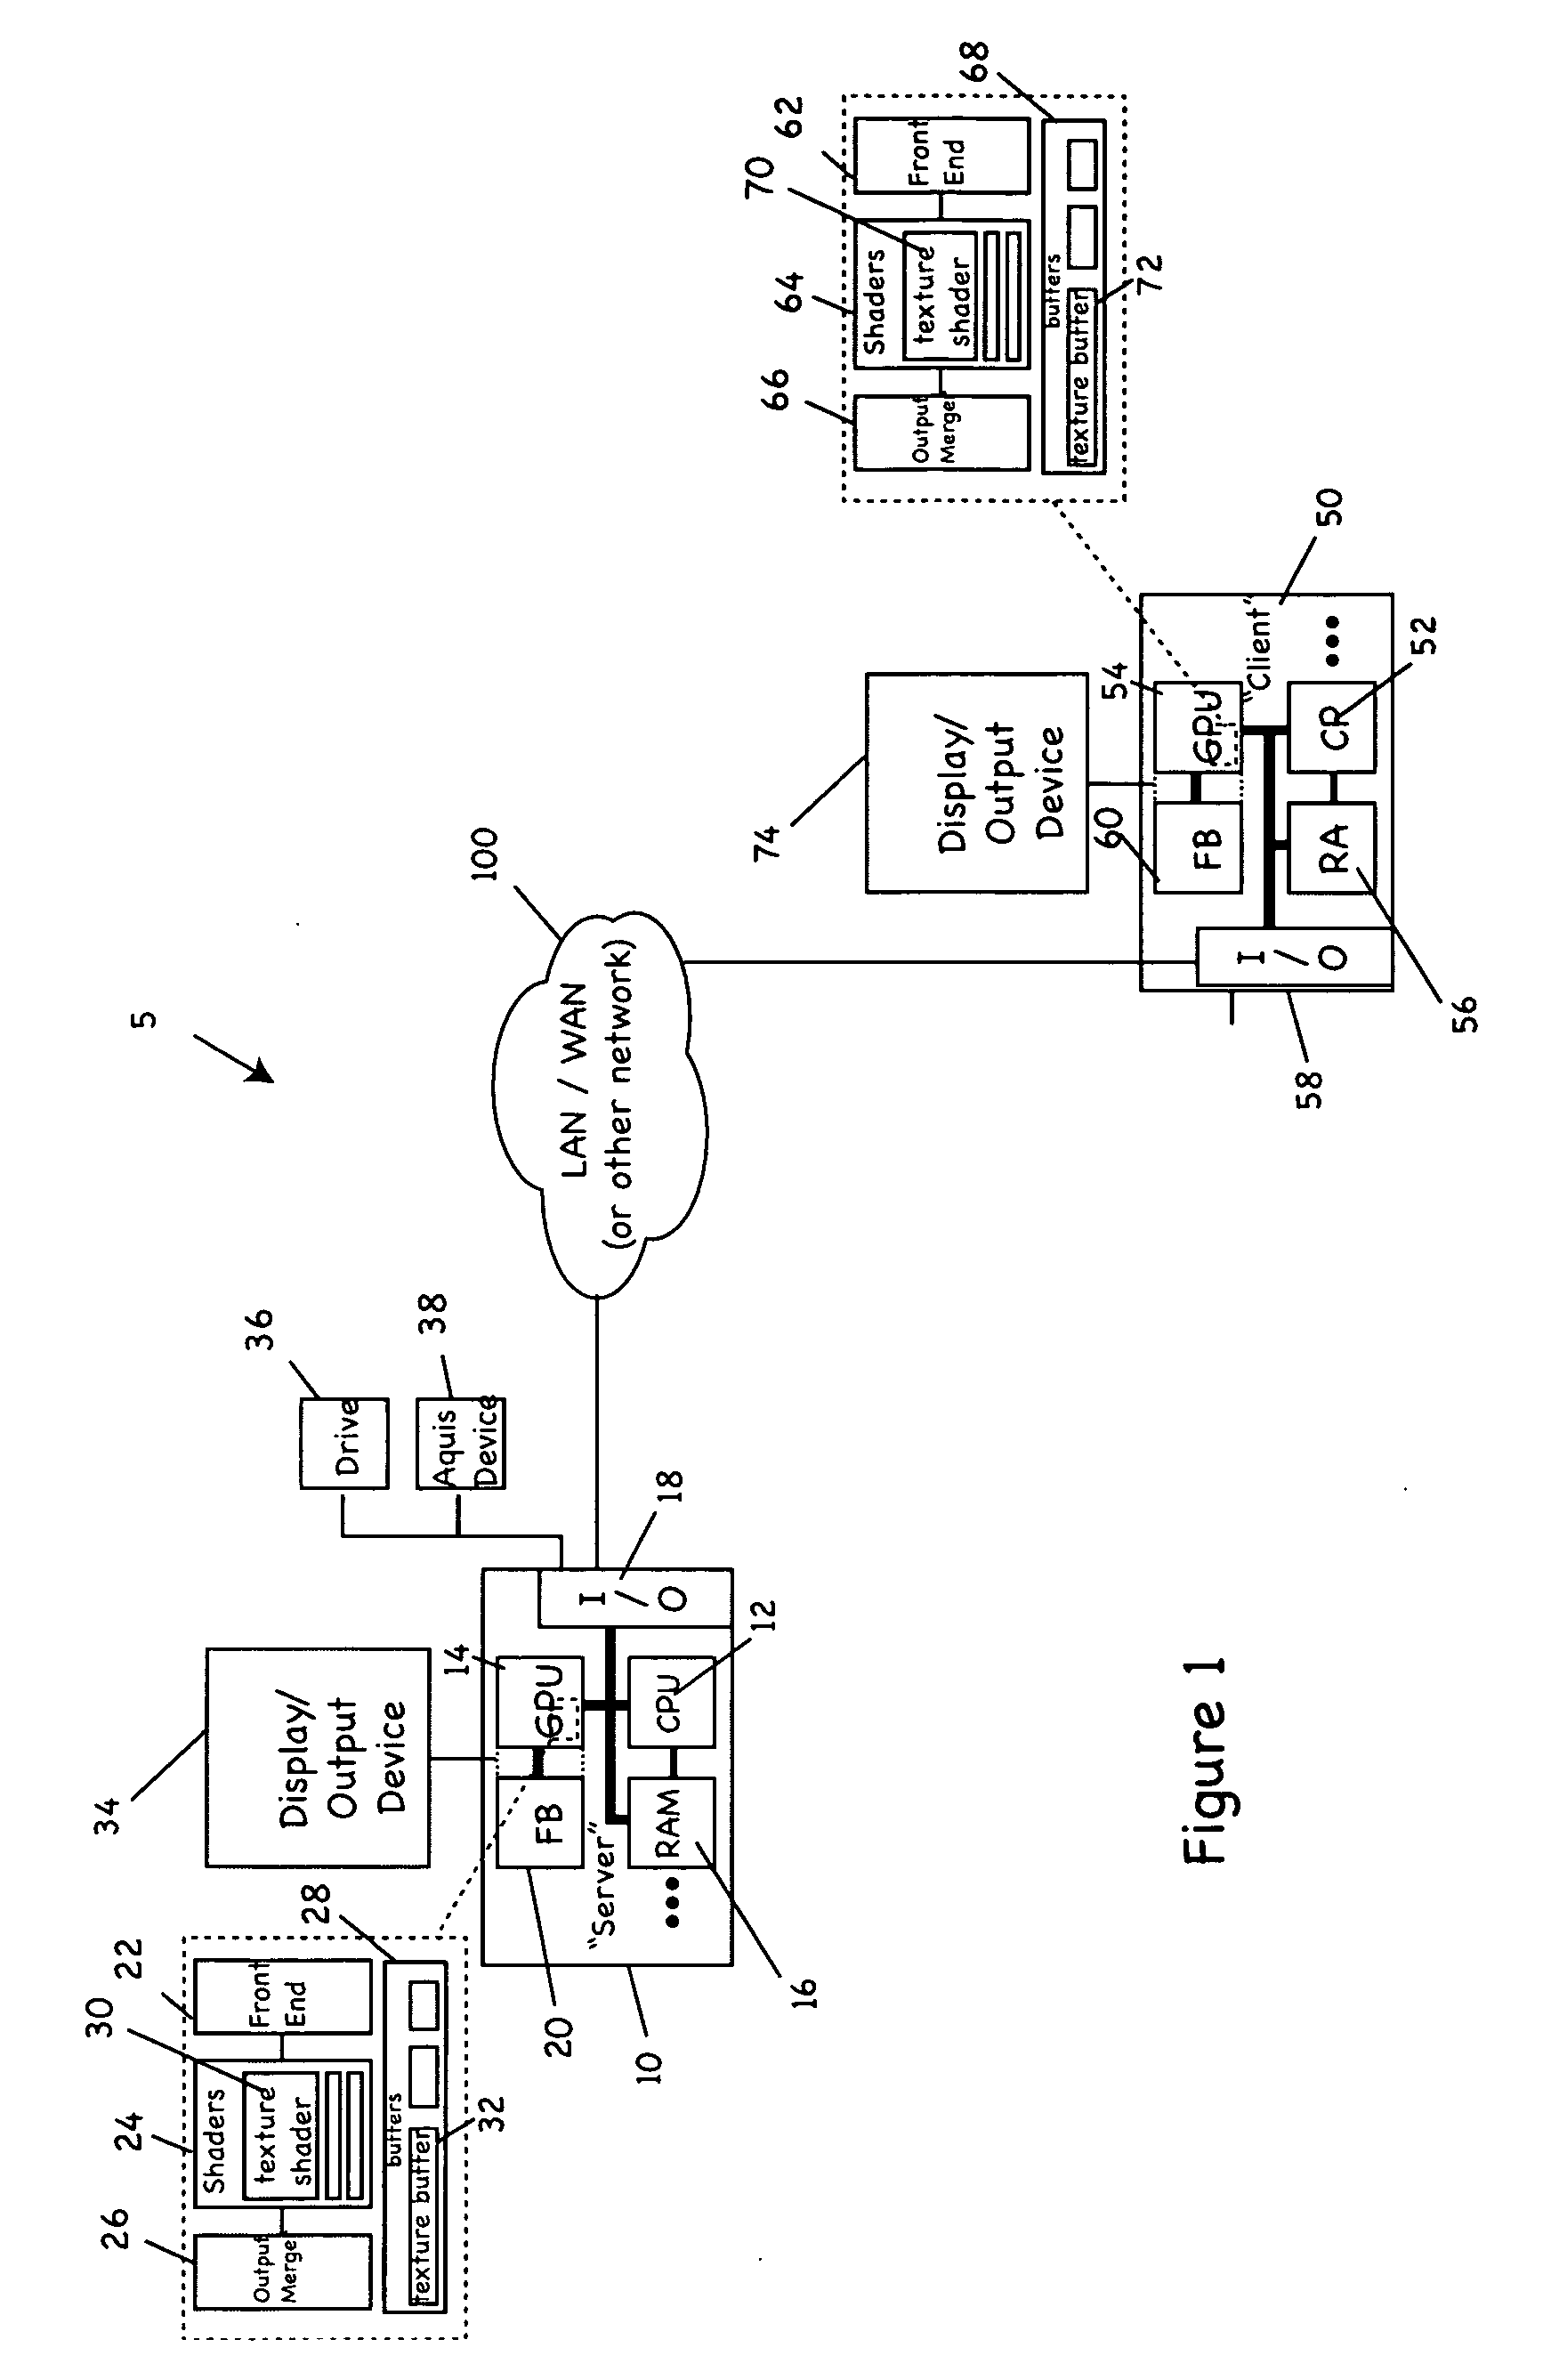 Methods and apparatus for image compression and decompression using graphics processing unit (GPU)